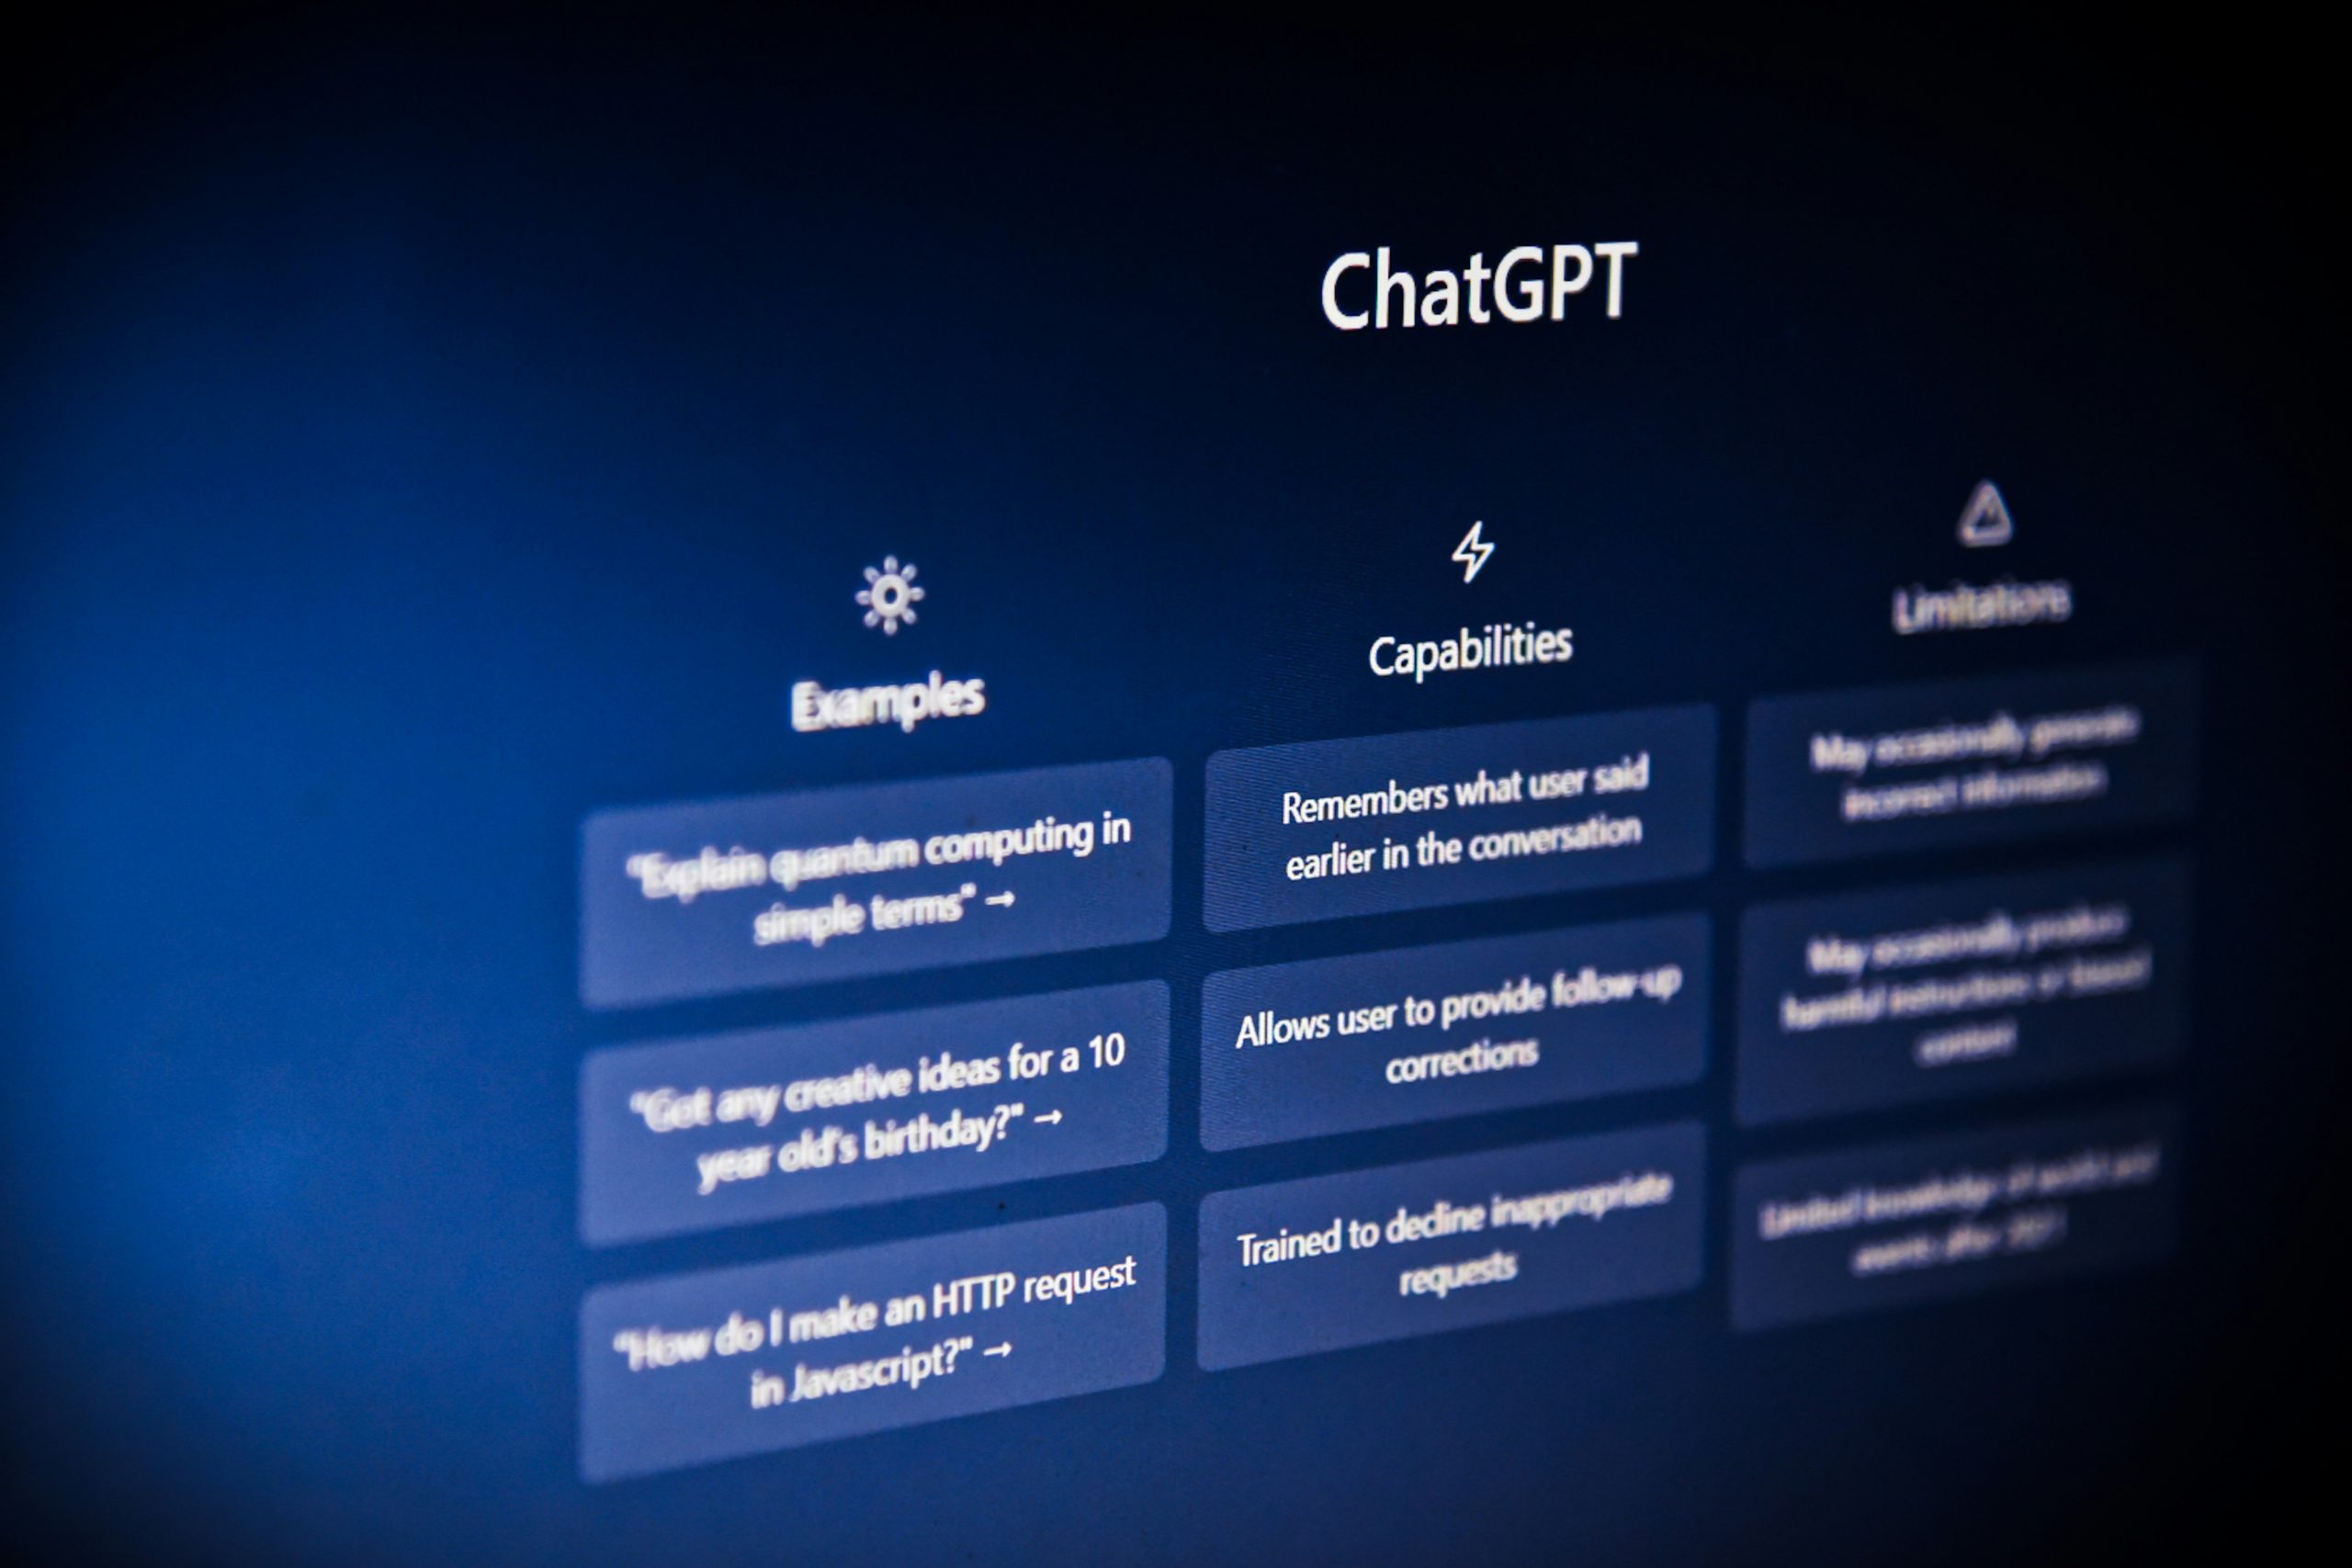 chatgpt features